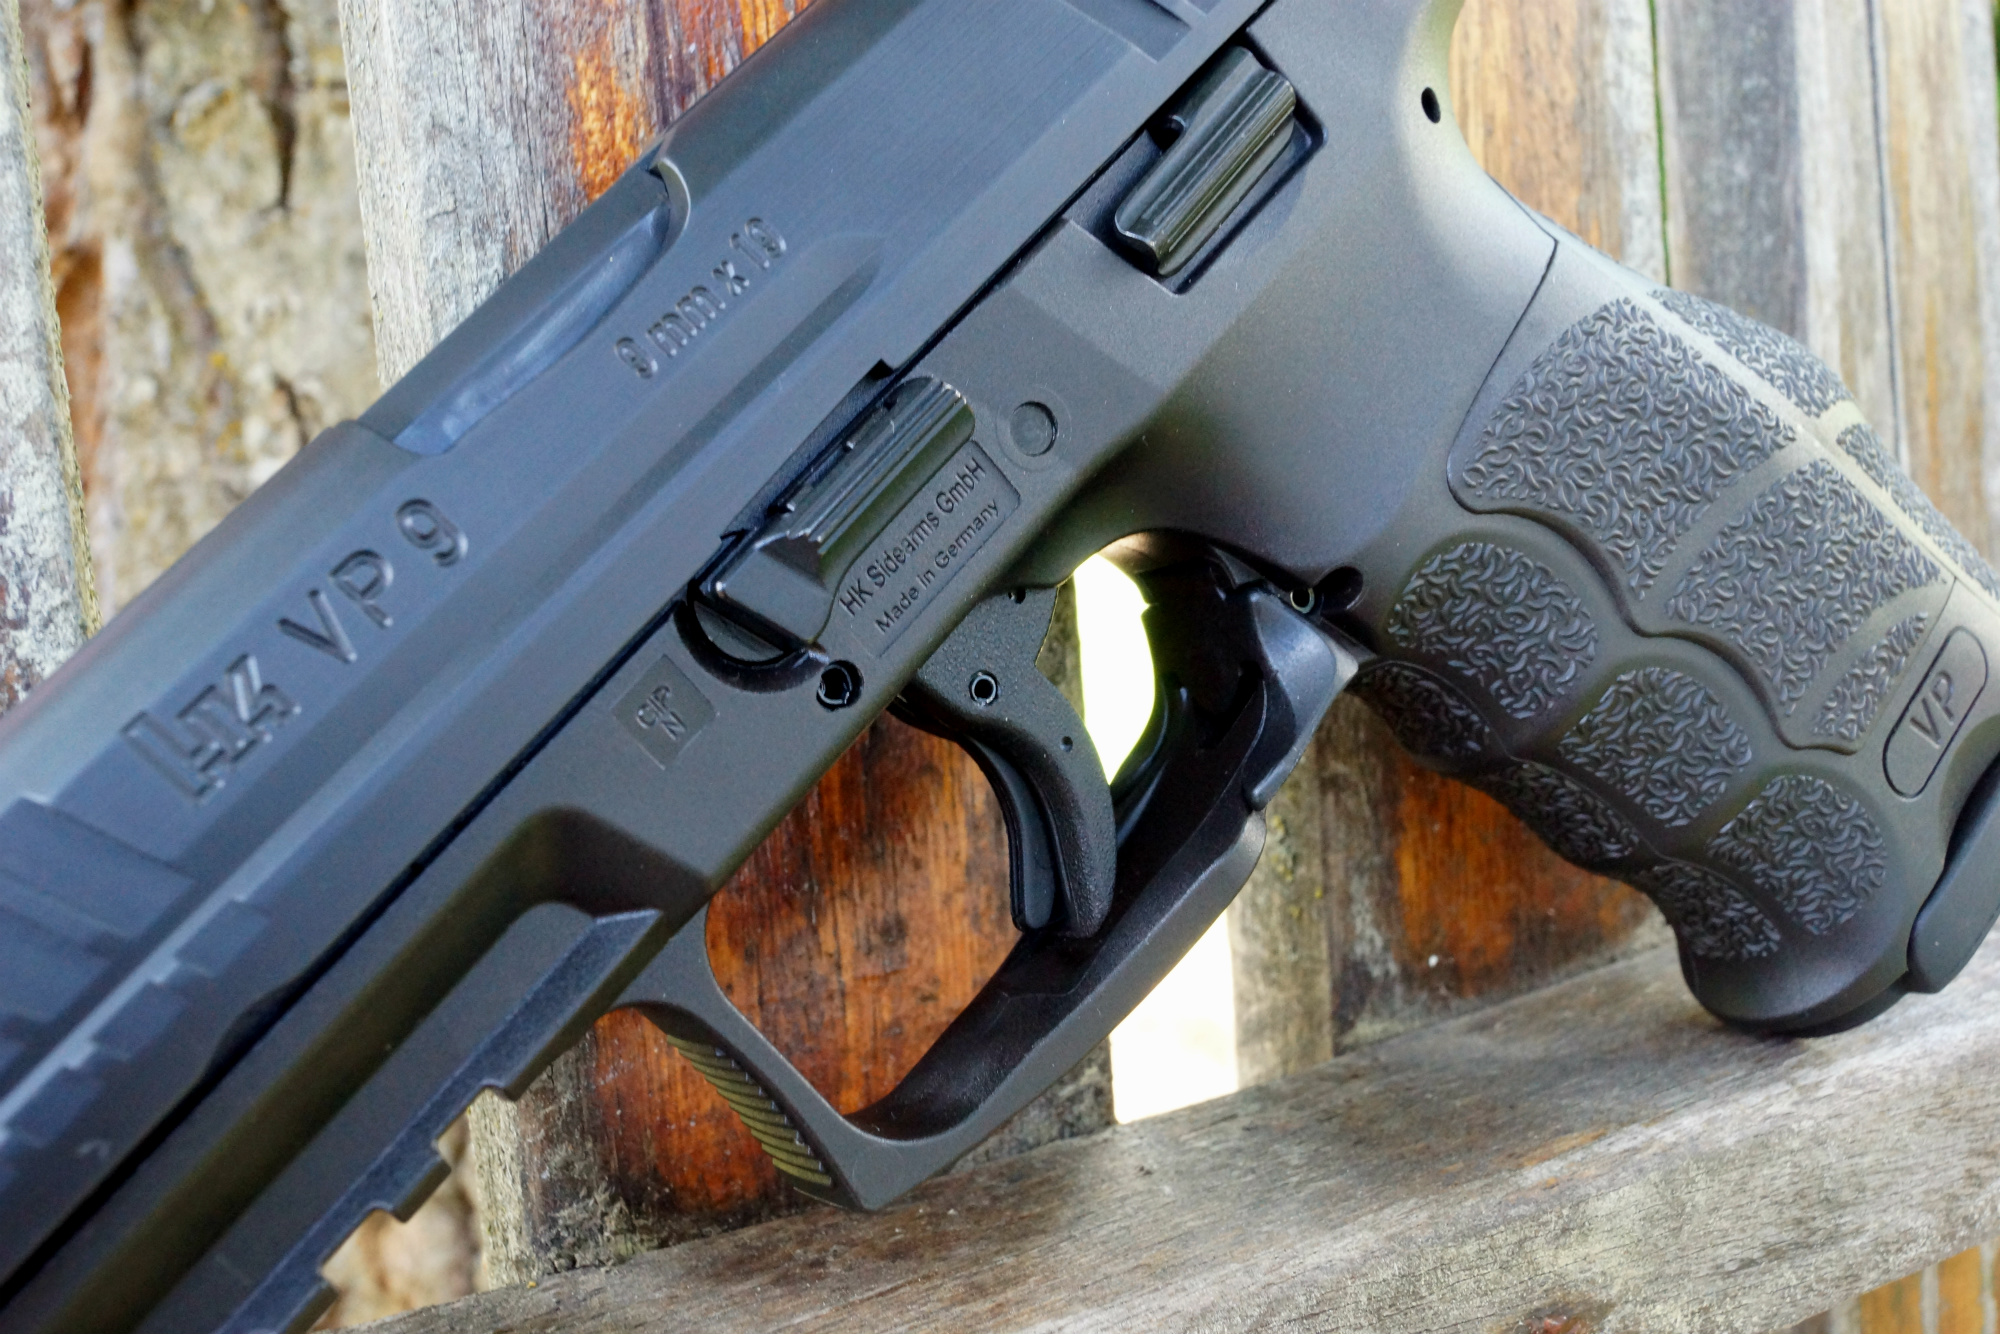 Like the PPQ, the VP9 is single action in the true sense of the term. 